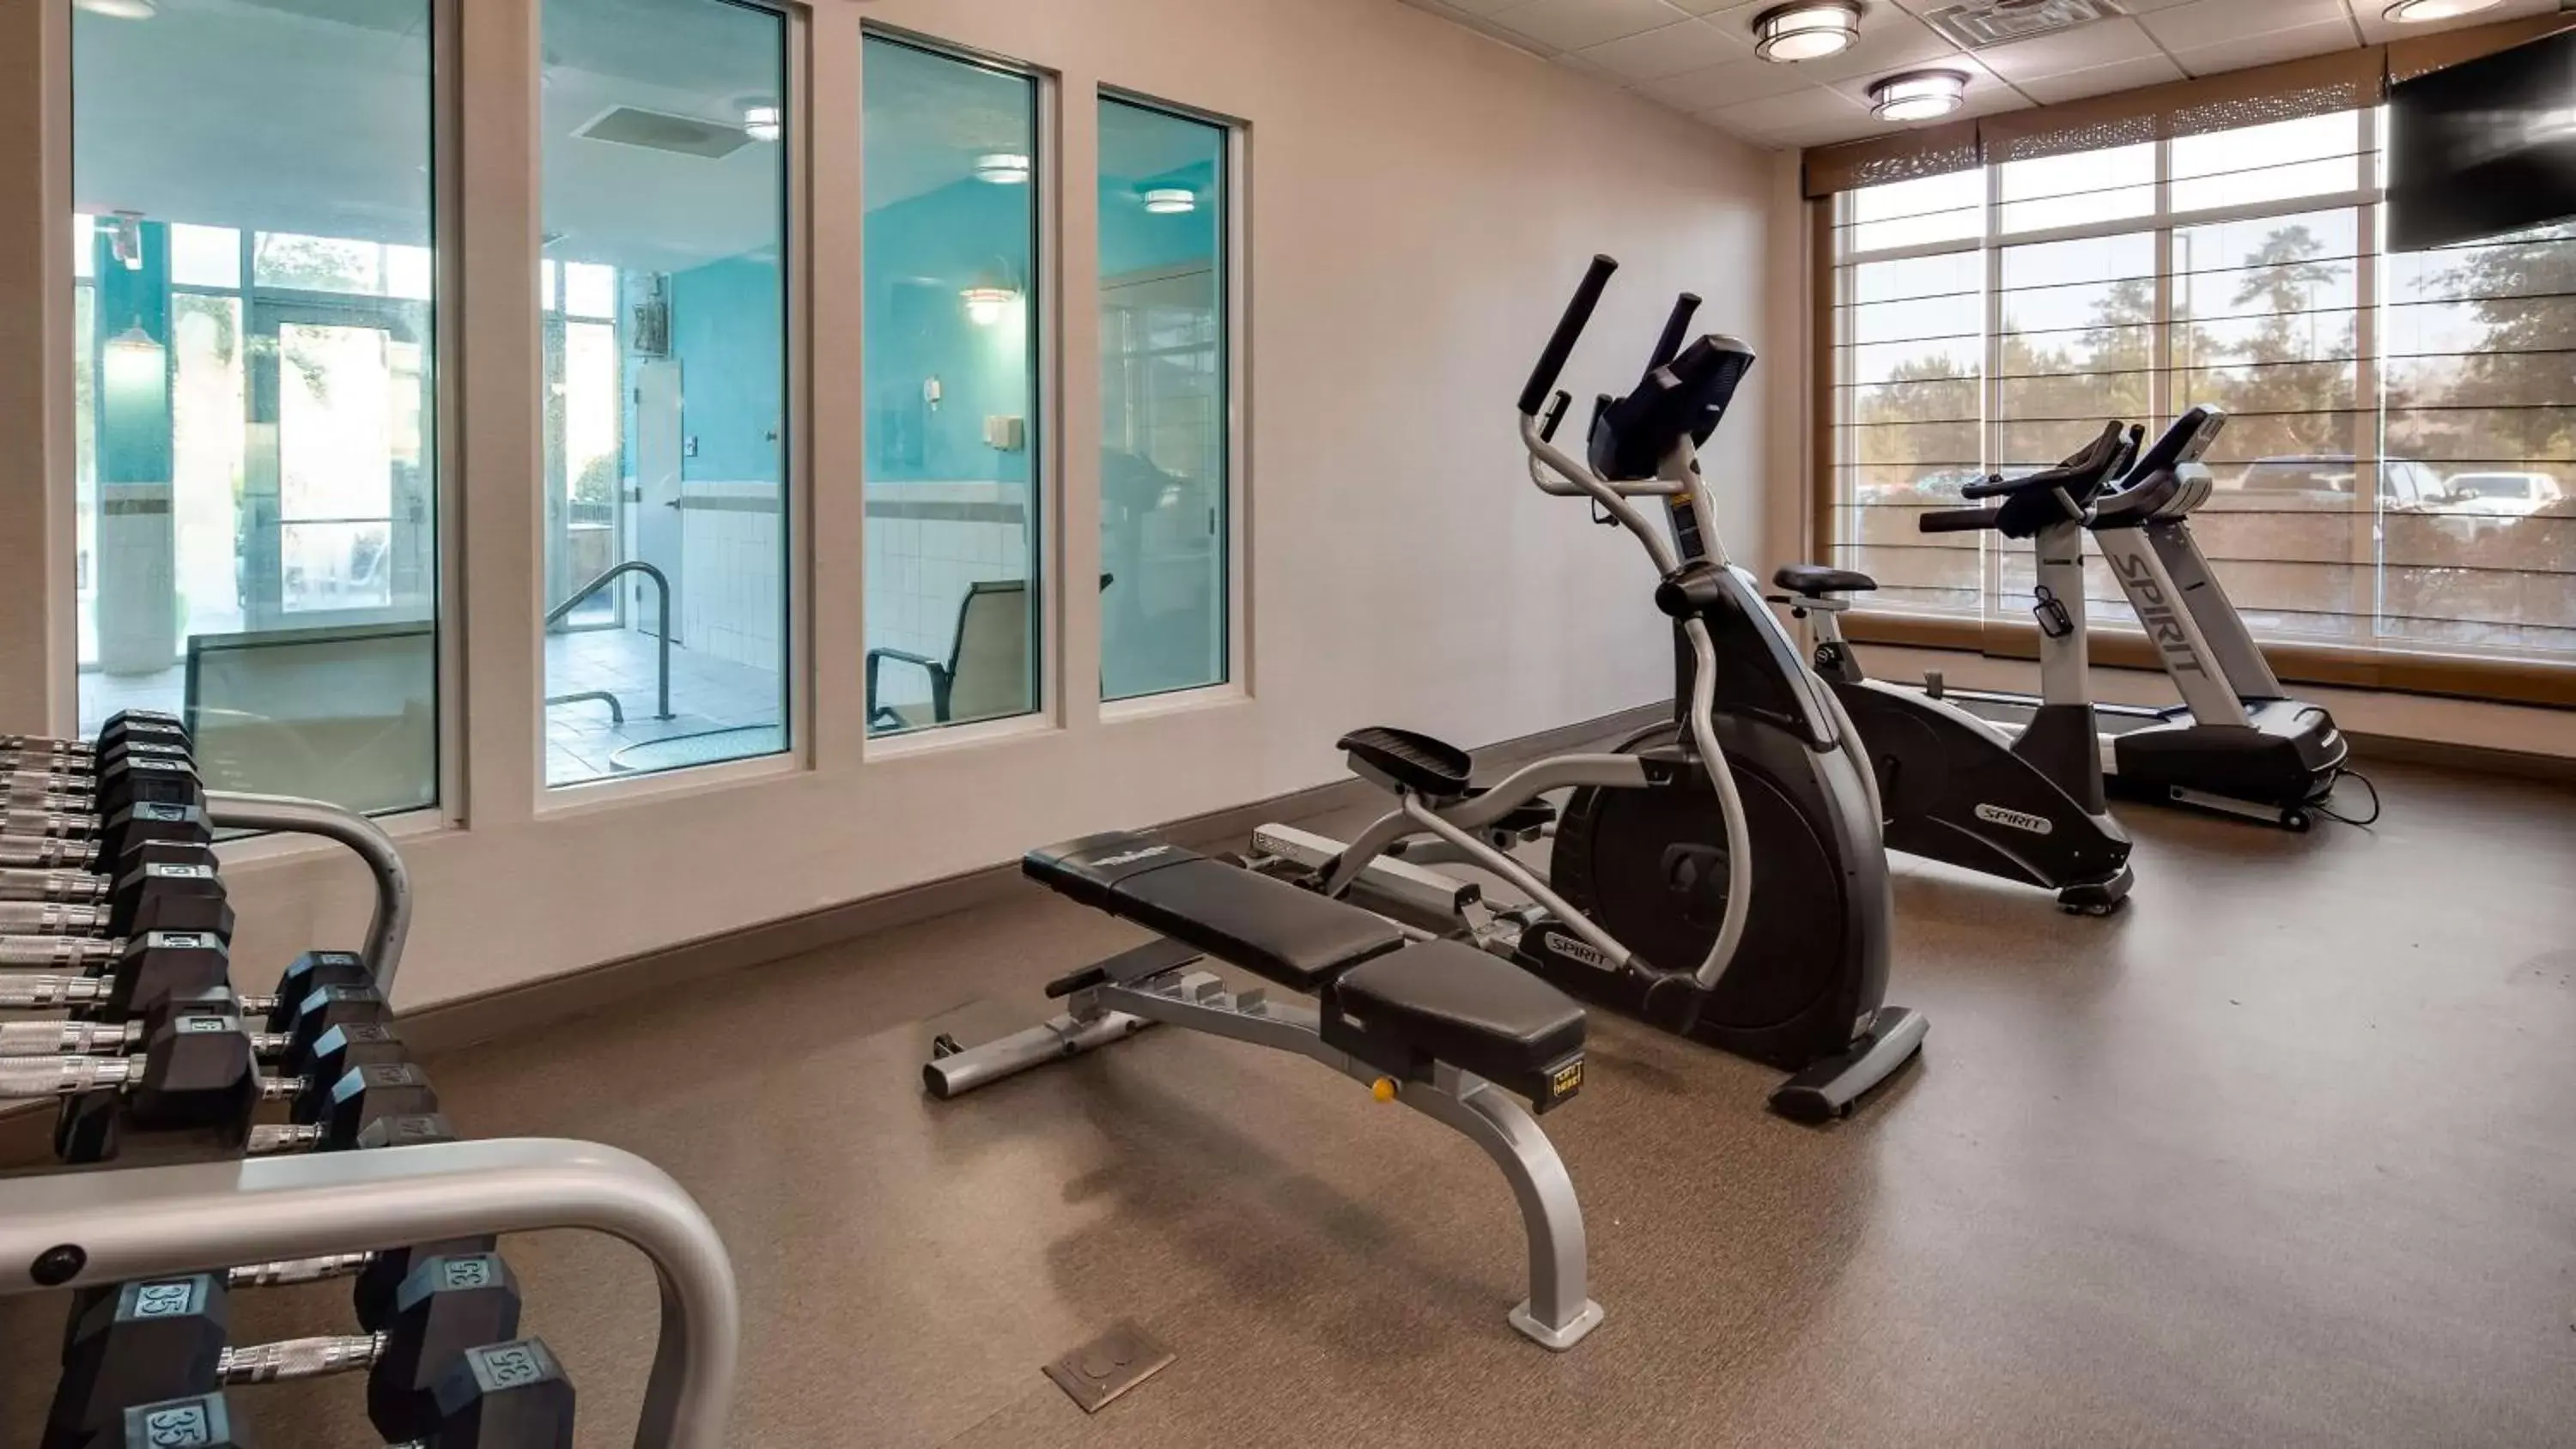 Fitness centre/facilities, Fitness Center/Facilities in Best Western Premier I-95 Savannah Airport/ Pooler West